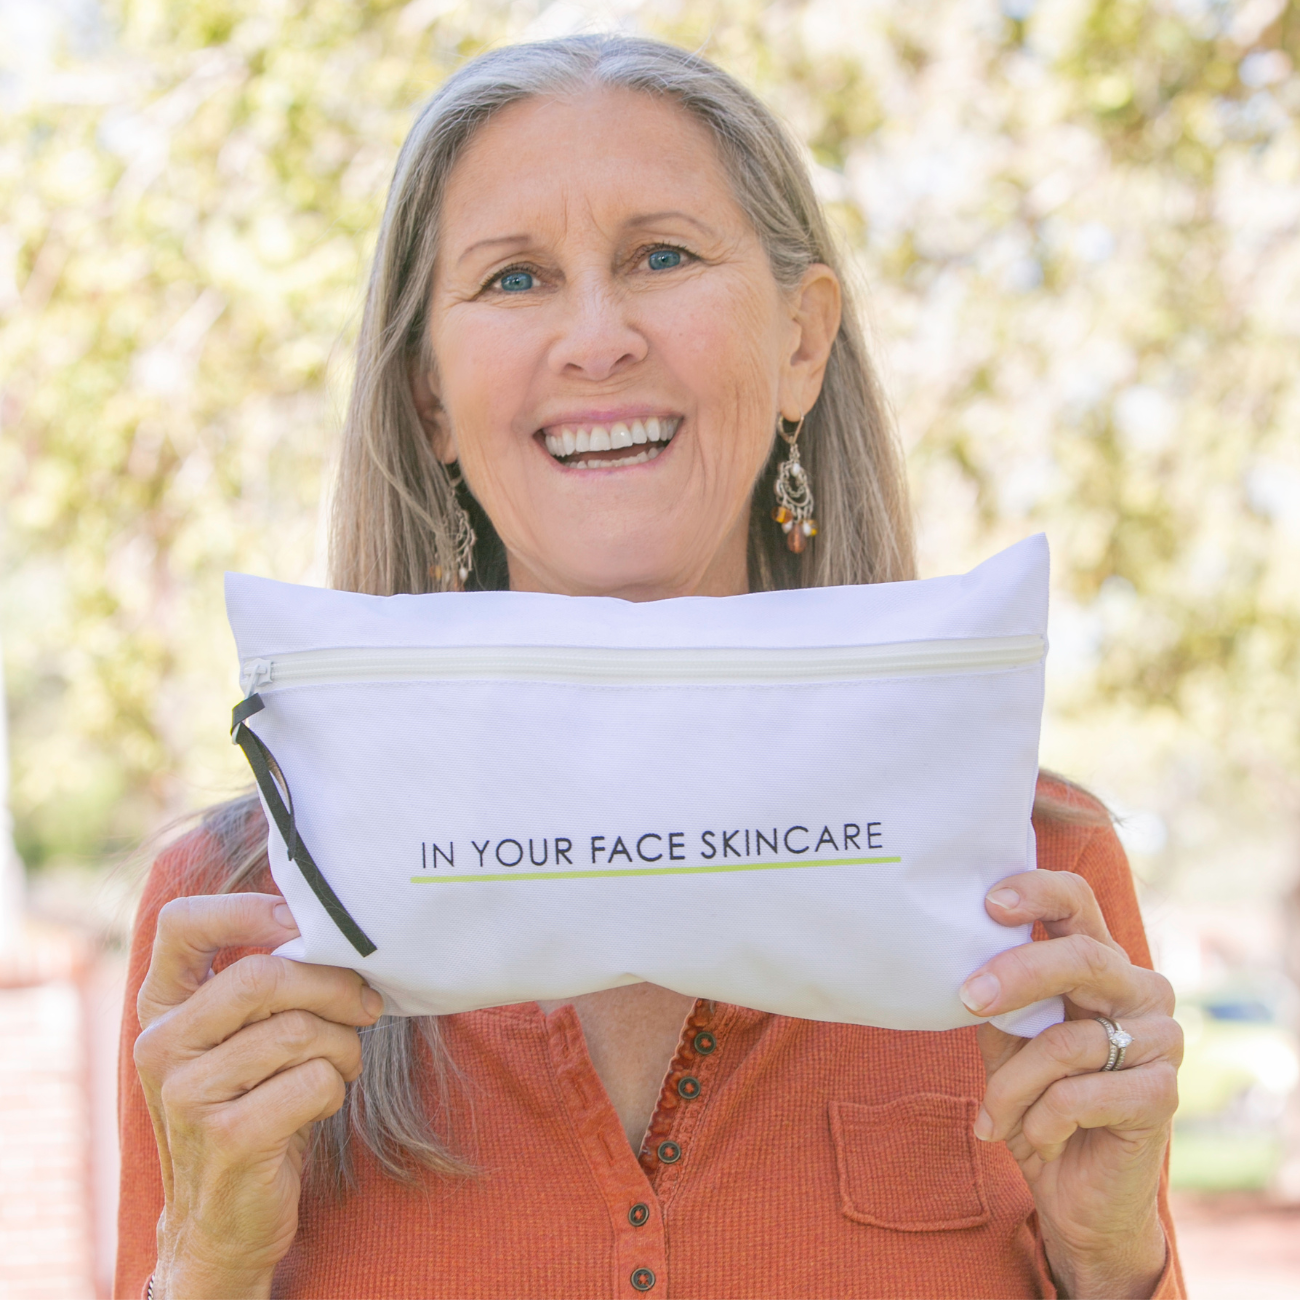 an image of a white rectangular zippered makeup bag that says "IN YOUR FACE SKINCARE" being held by a mature women with long grey hair wearing a rust-colored shirt on a background of trees